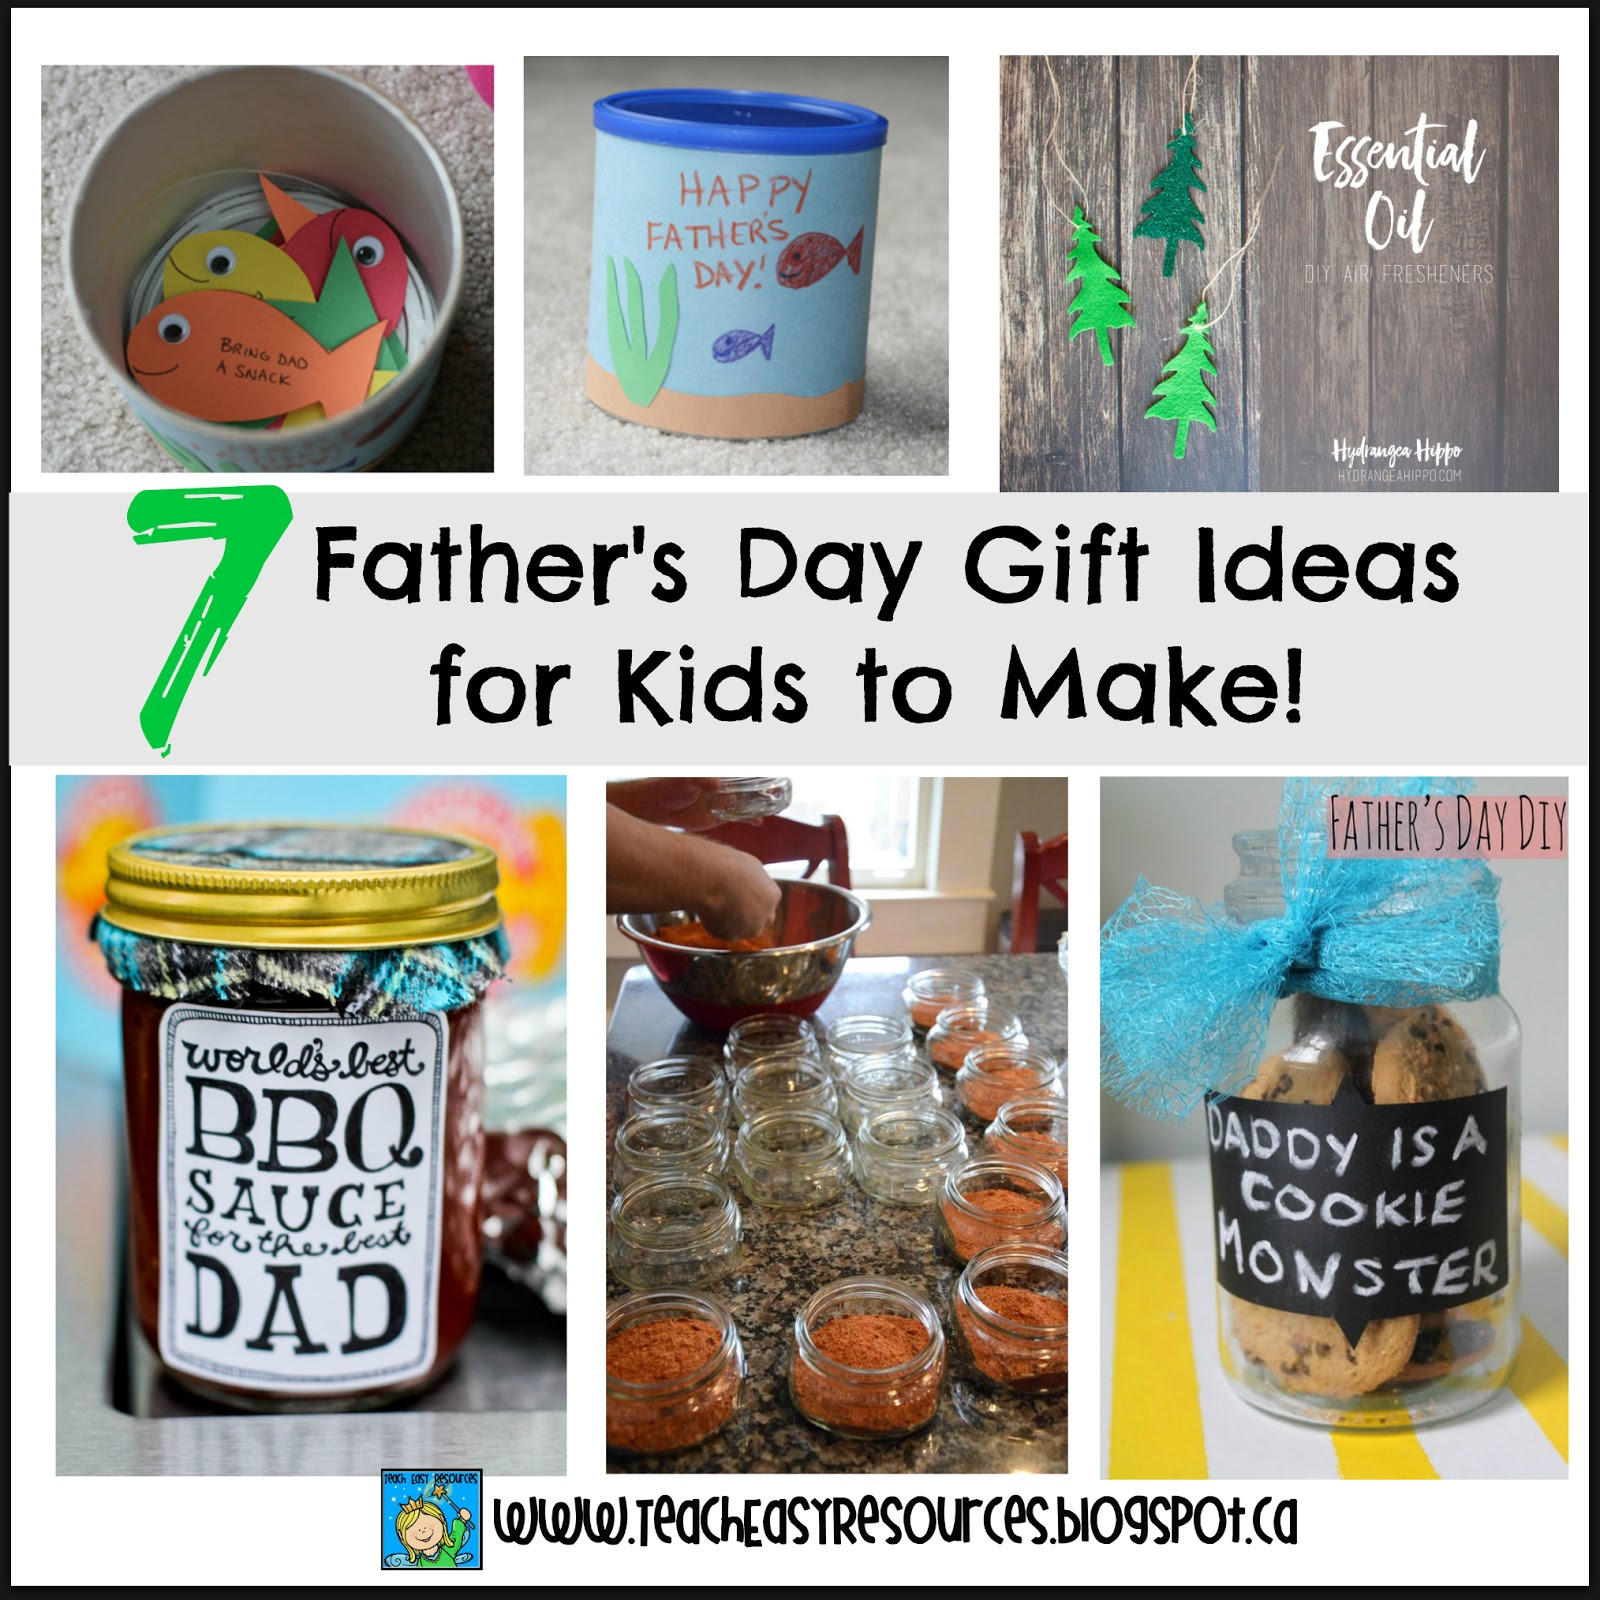 Fathersday Gift Ideas
 Teach Easy Resources Father s Day Gift Ideas that Kids